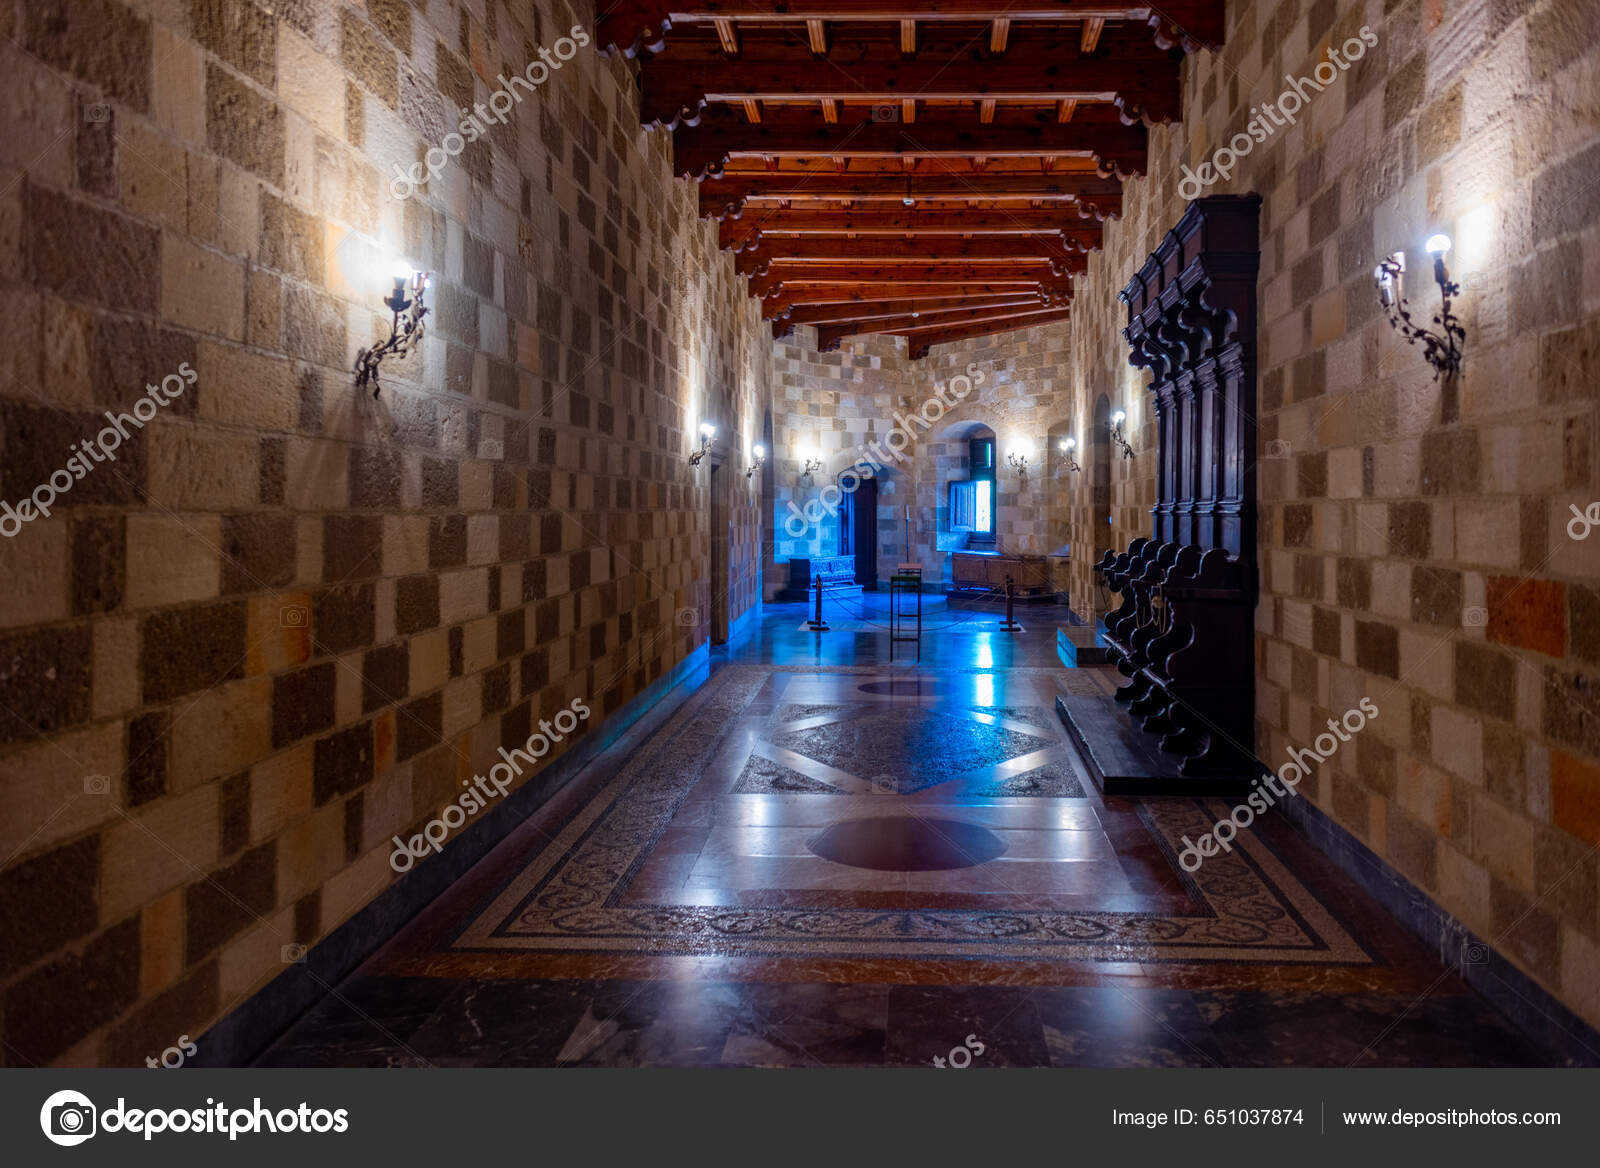 THE PALACE OF THE GRAND MASTER OF THE KNIGHTS, RHODES, GREECE. *INSIDE THE  MUSEUM* 